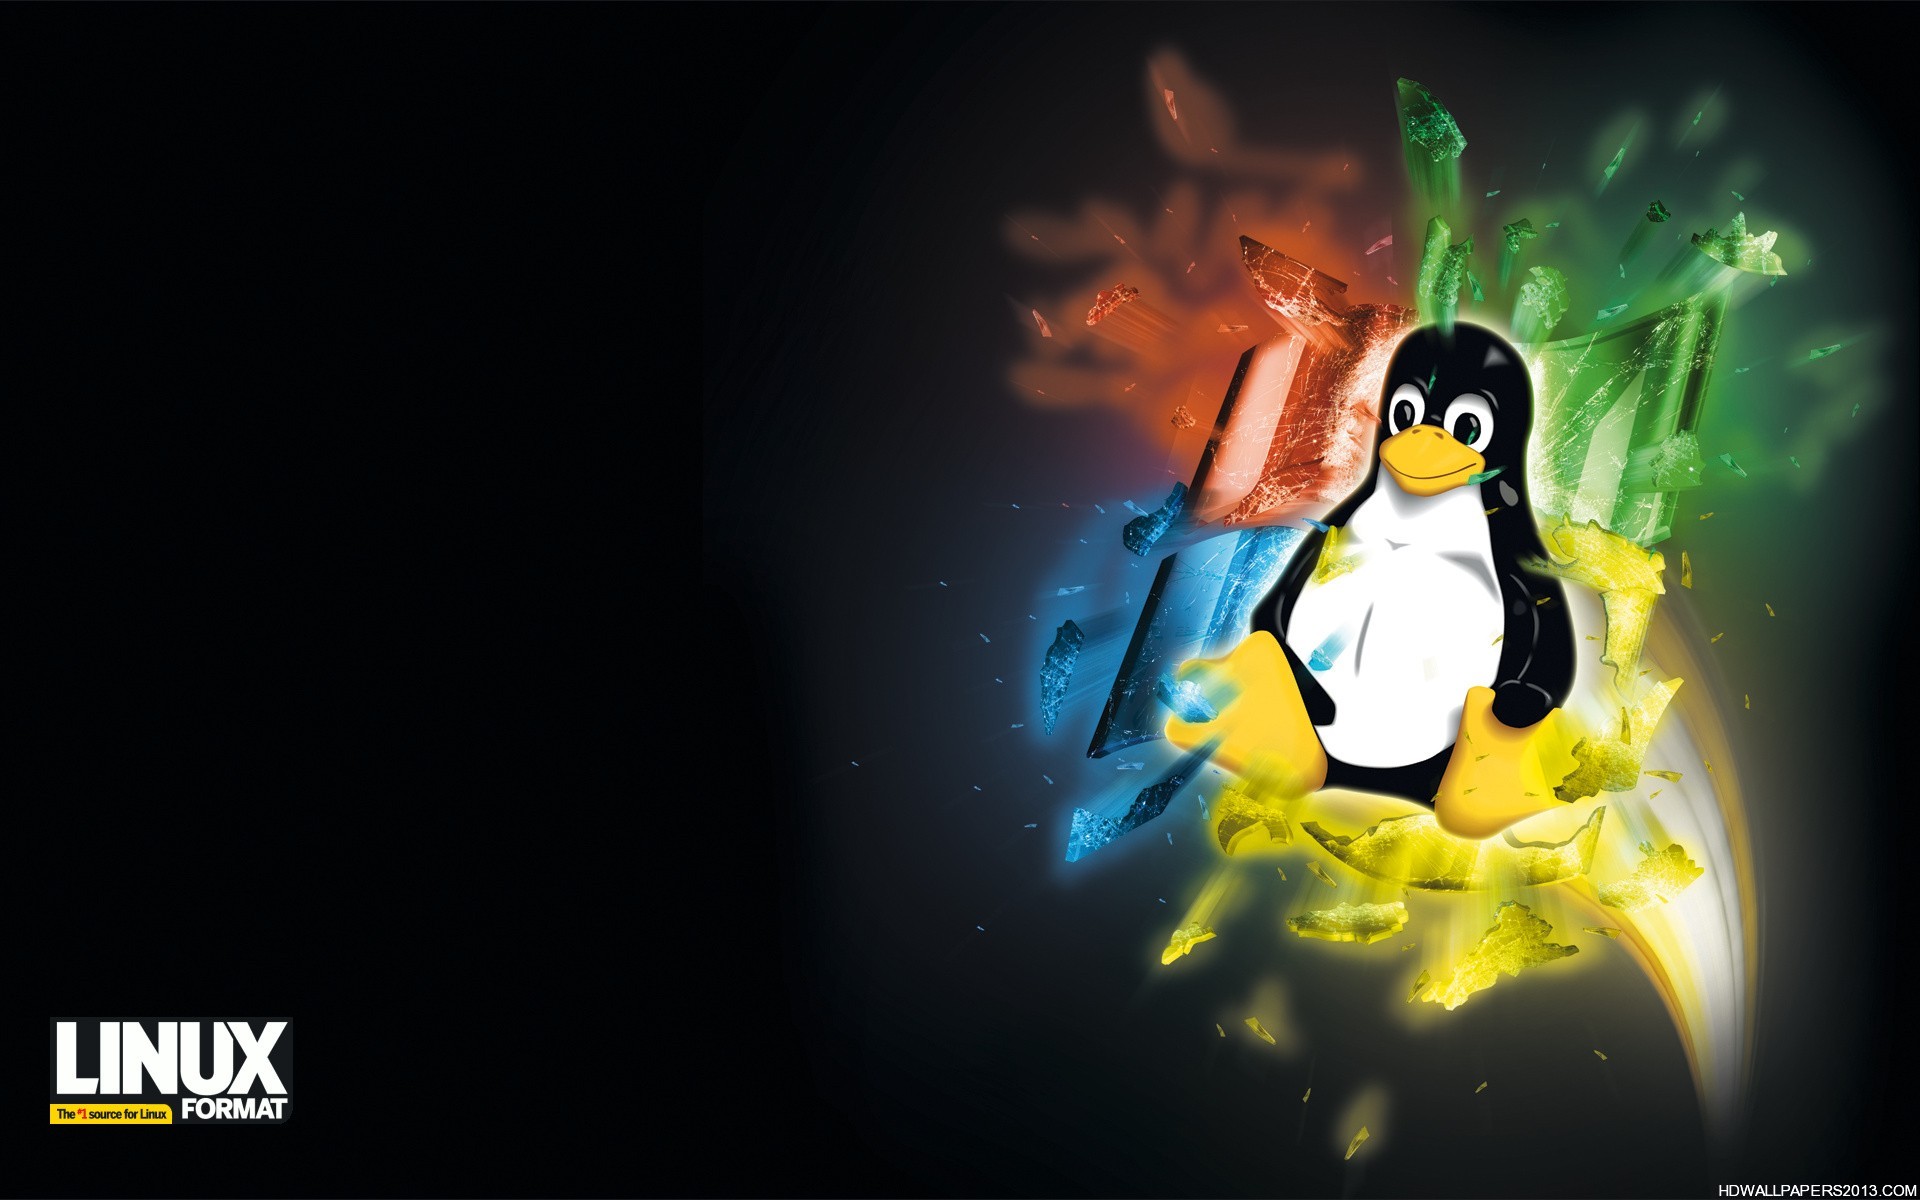  linux wallpapers hd wallpapers ubuntu linux wallpapers hd background